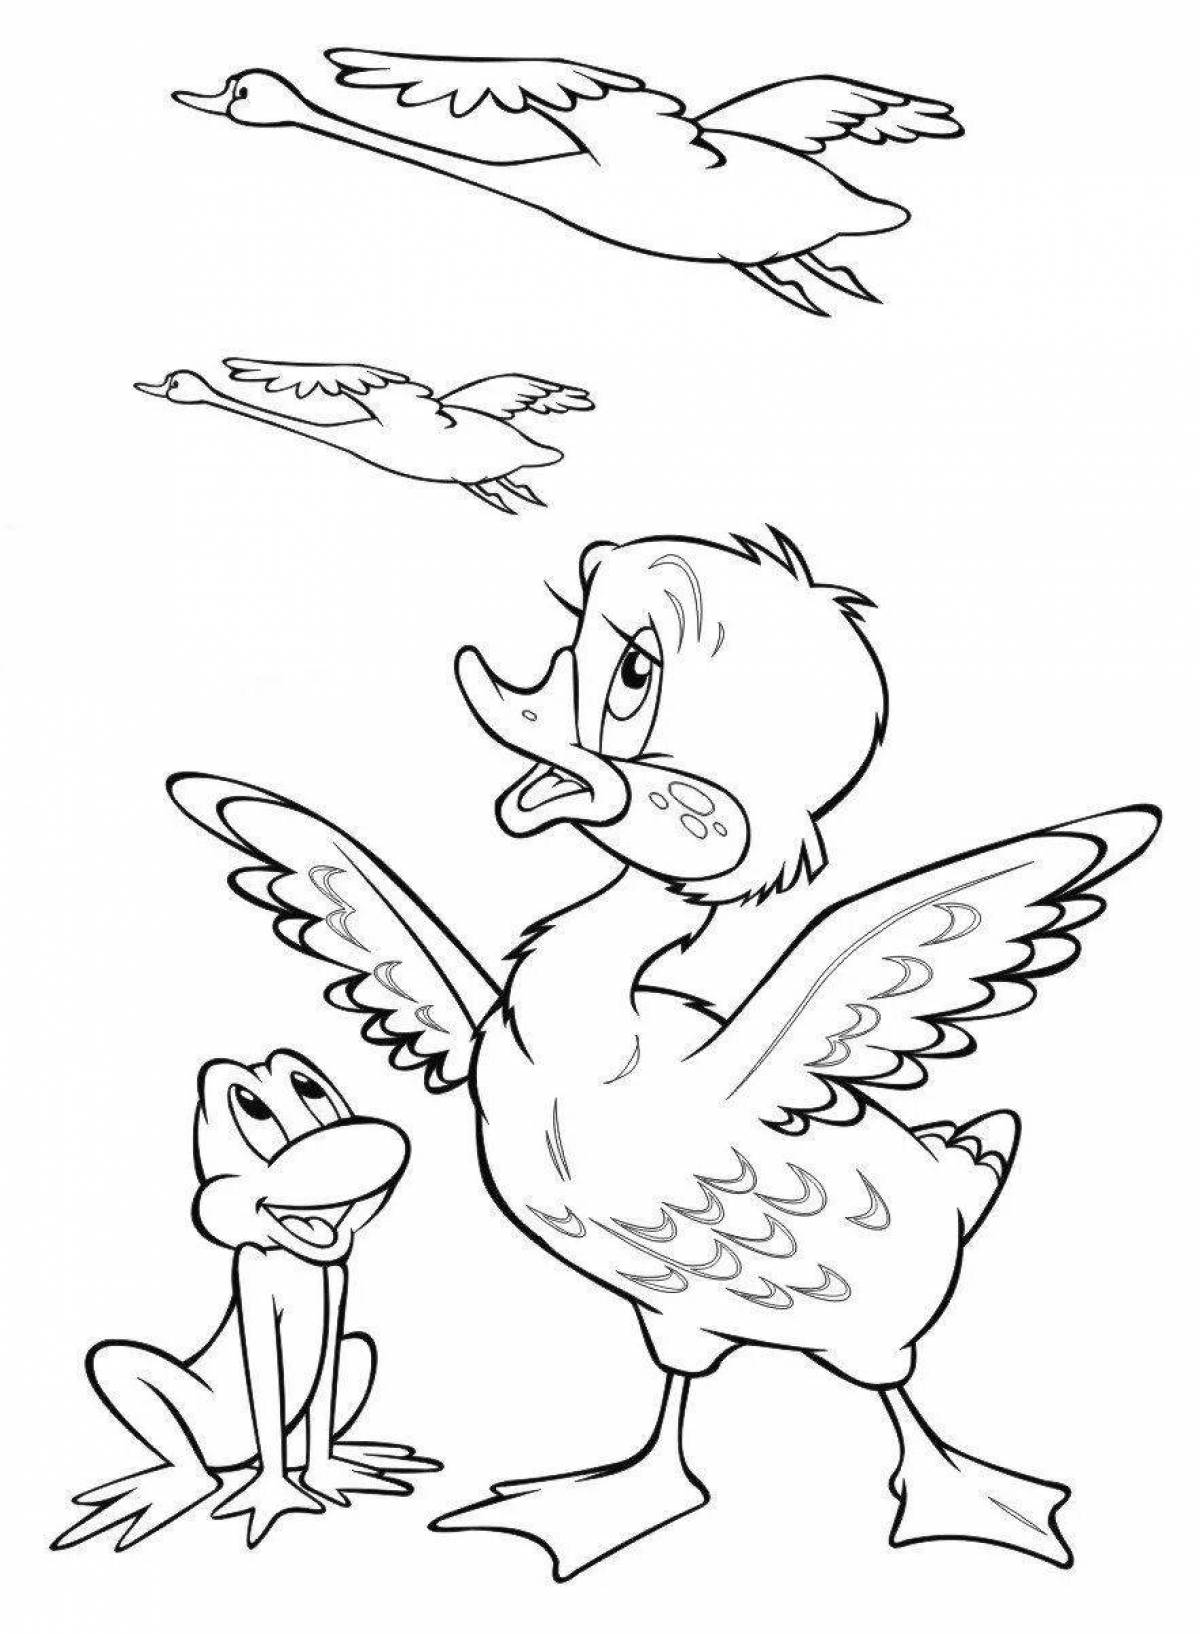 Coloring ugly duckling with colorful splashes for kids